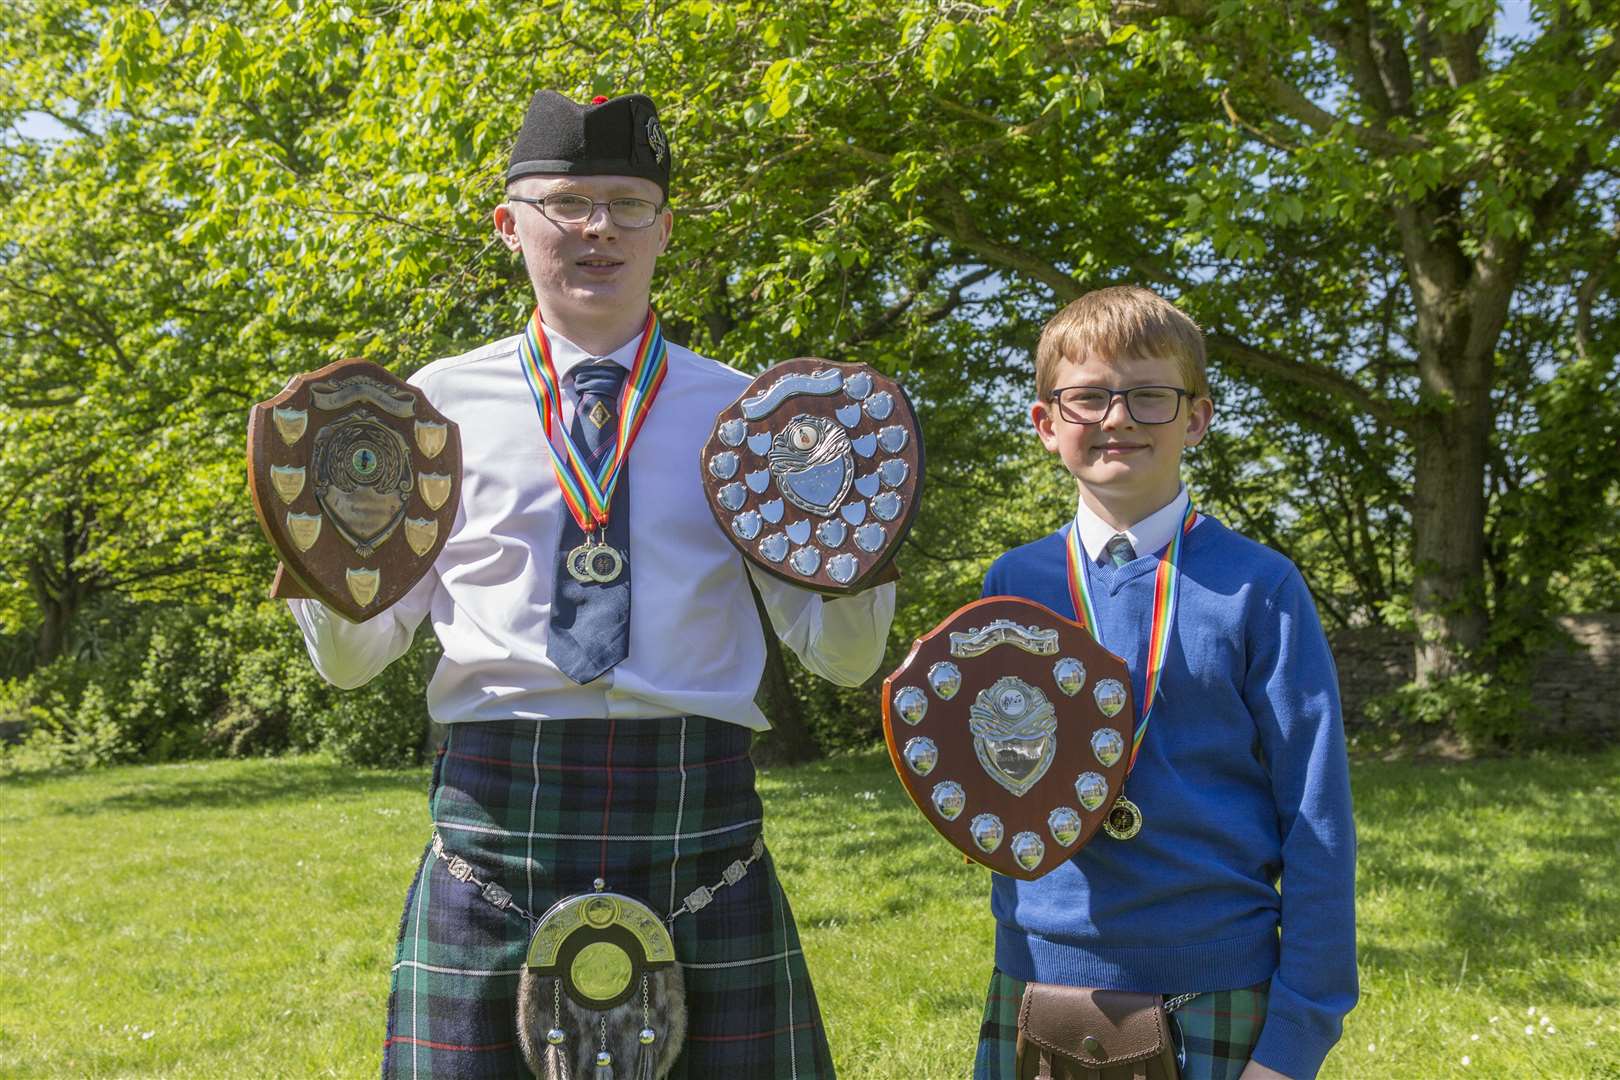 Arran King won both the senior piping trophies, receiving the Piping Challenge Shield for march and the Bagpipes Shield for strathspey and reel, while the primary trophy, the Bagpipes Shield for march, went to Samuel Gunn. Picture: Robert MacDonald / Northern Studios